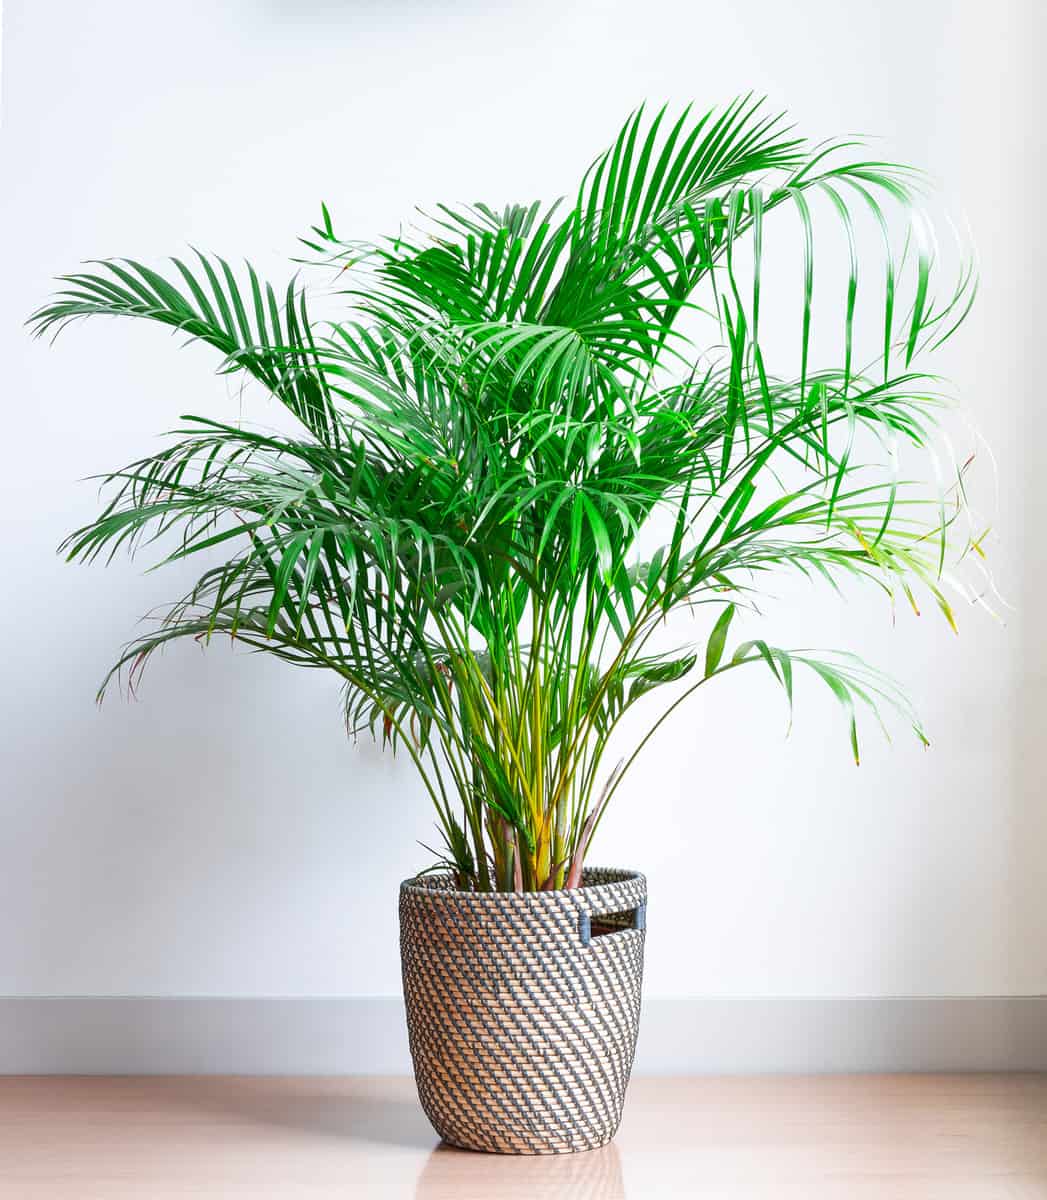 Areca Palm, Chrysalidocarpus lutescens, in a wicker basket, isolated in front of a white wall on a wooden floor